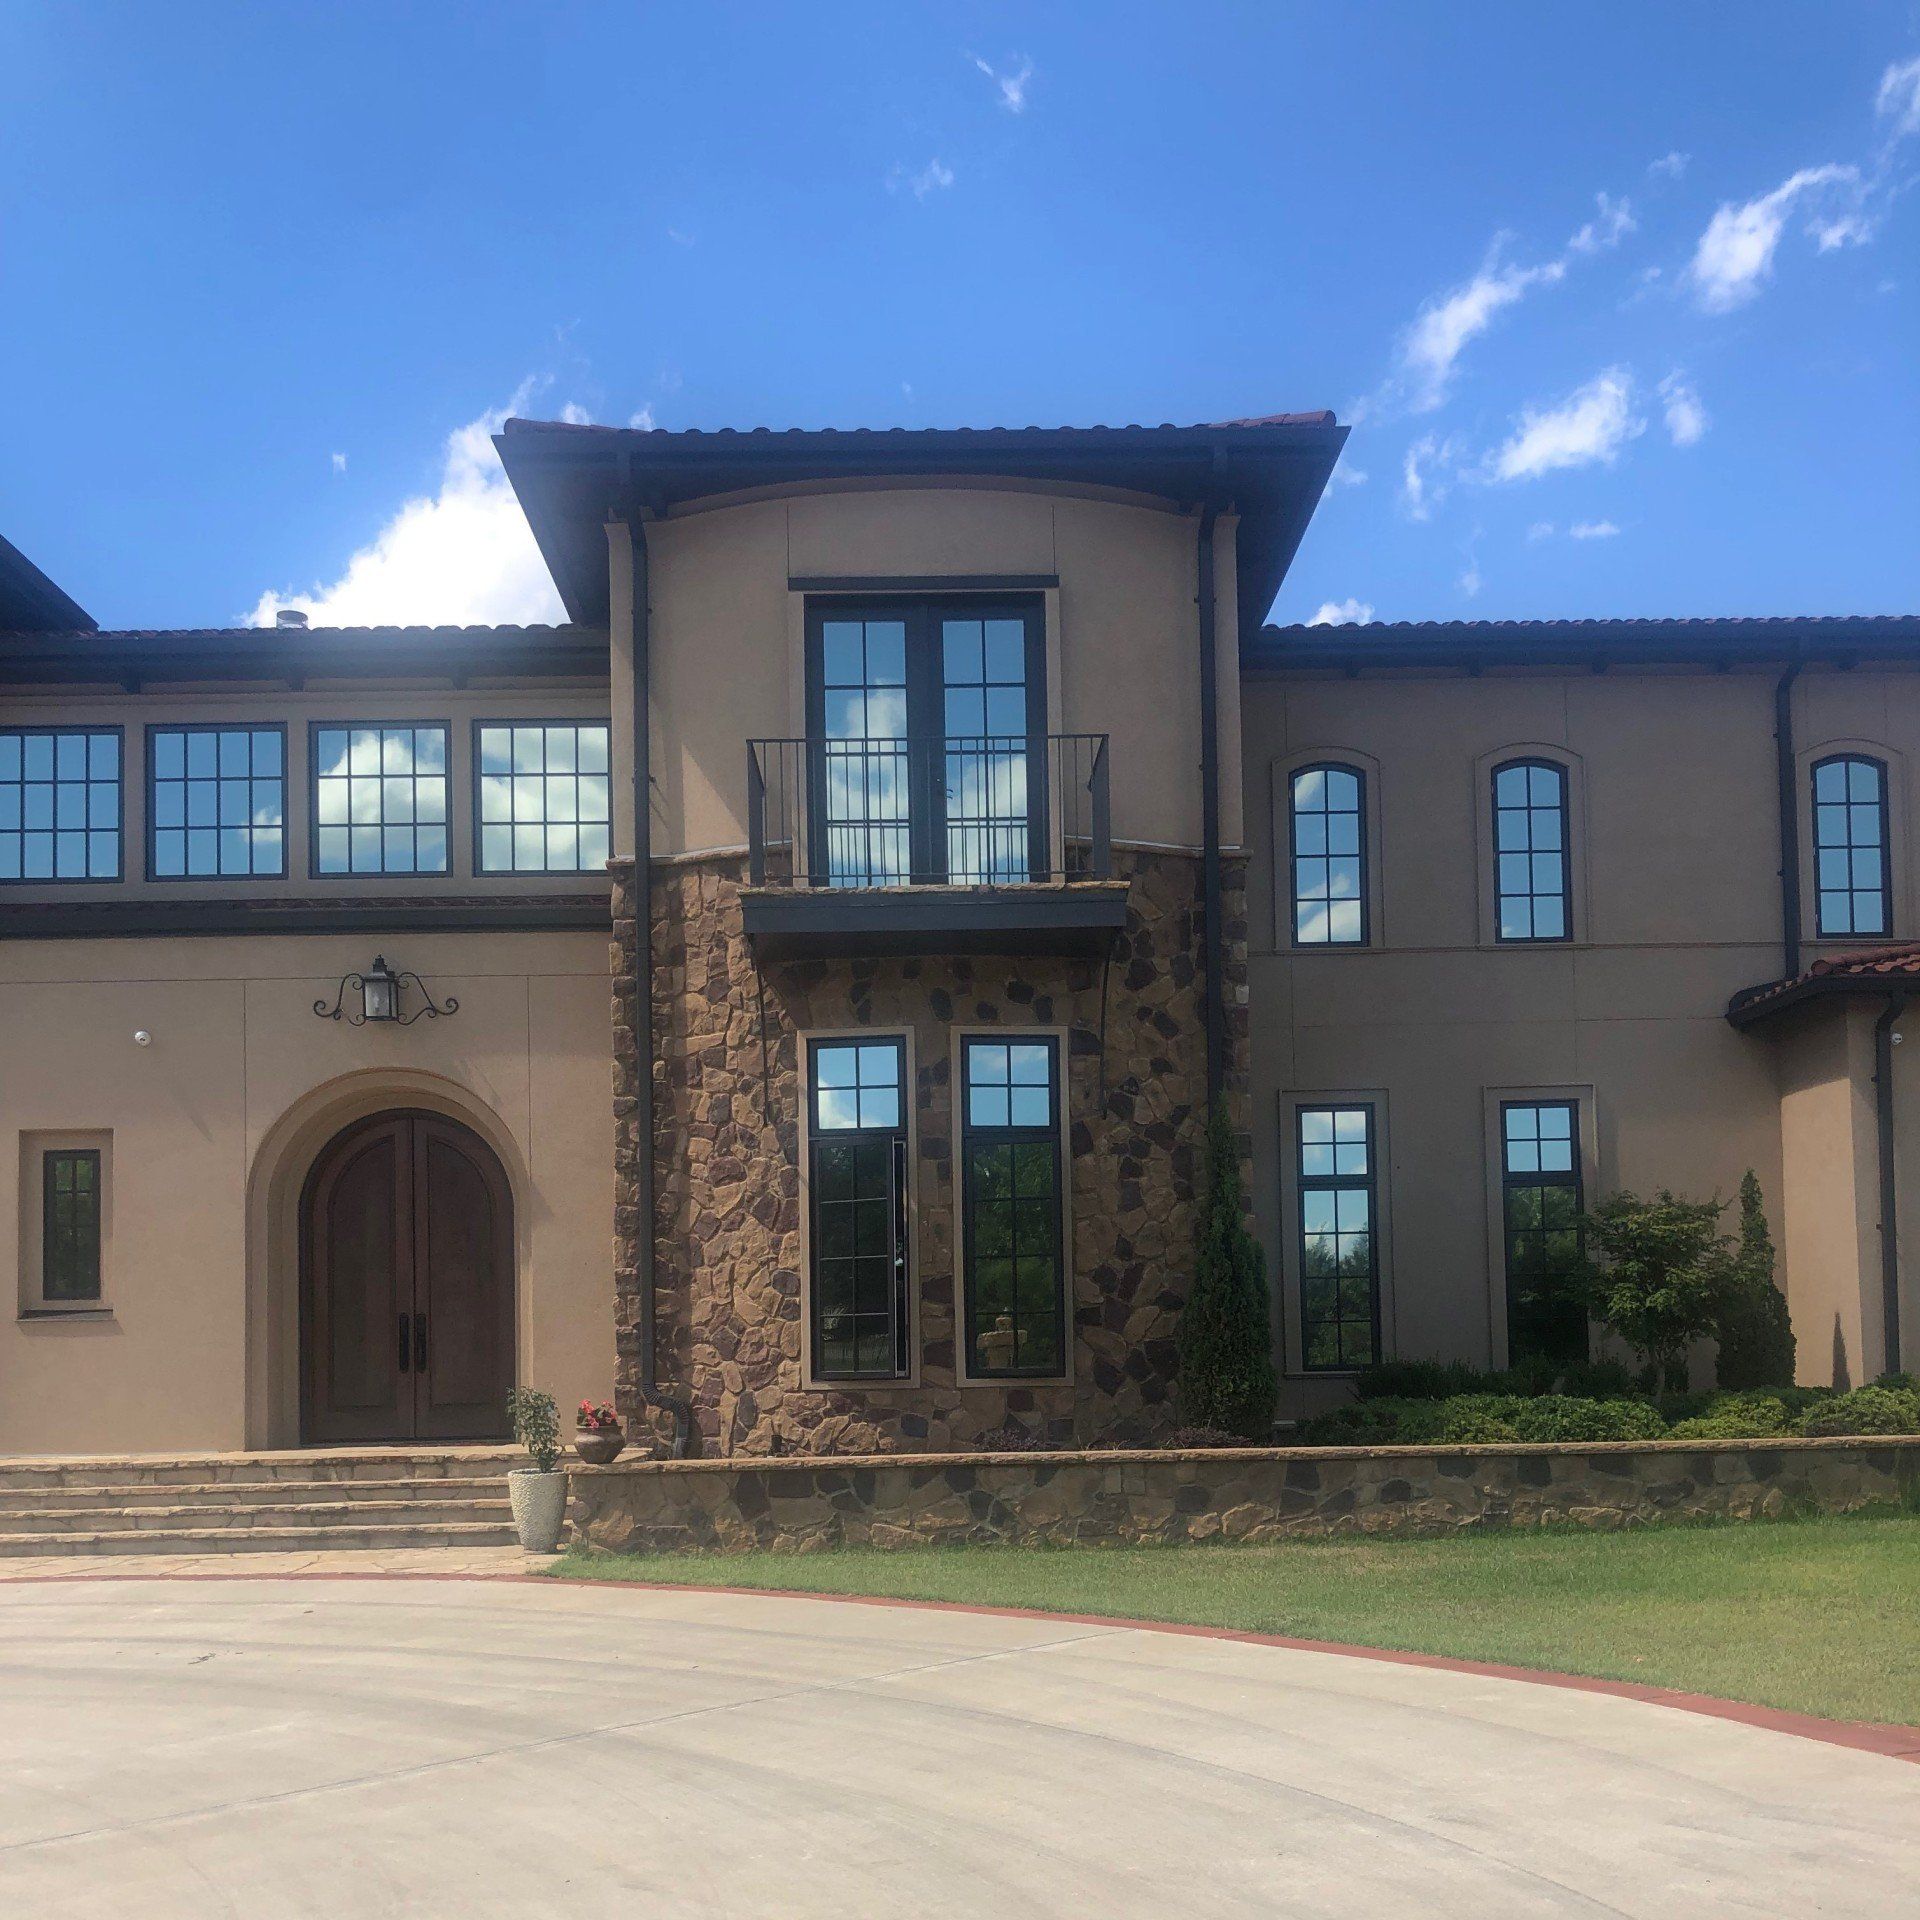 Professional Residential tinting service at mansion in Jones, AL - Max Heat blocked after Home tint installed on 6.14.2019